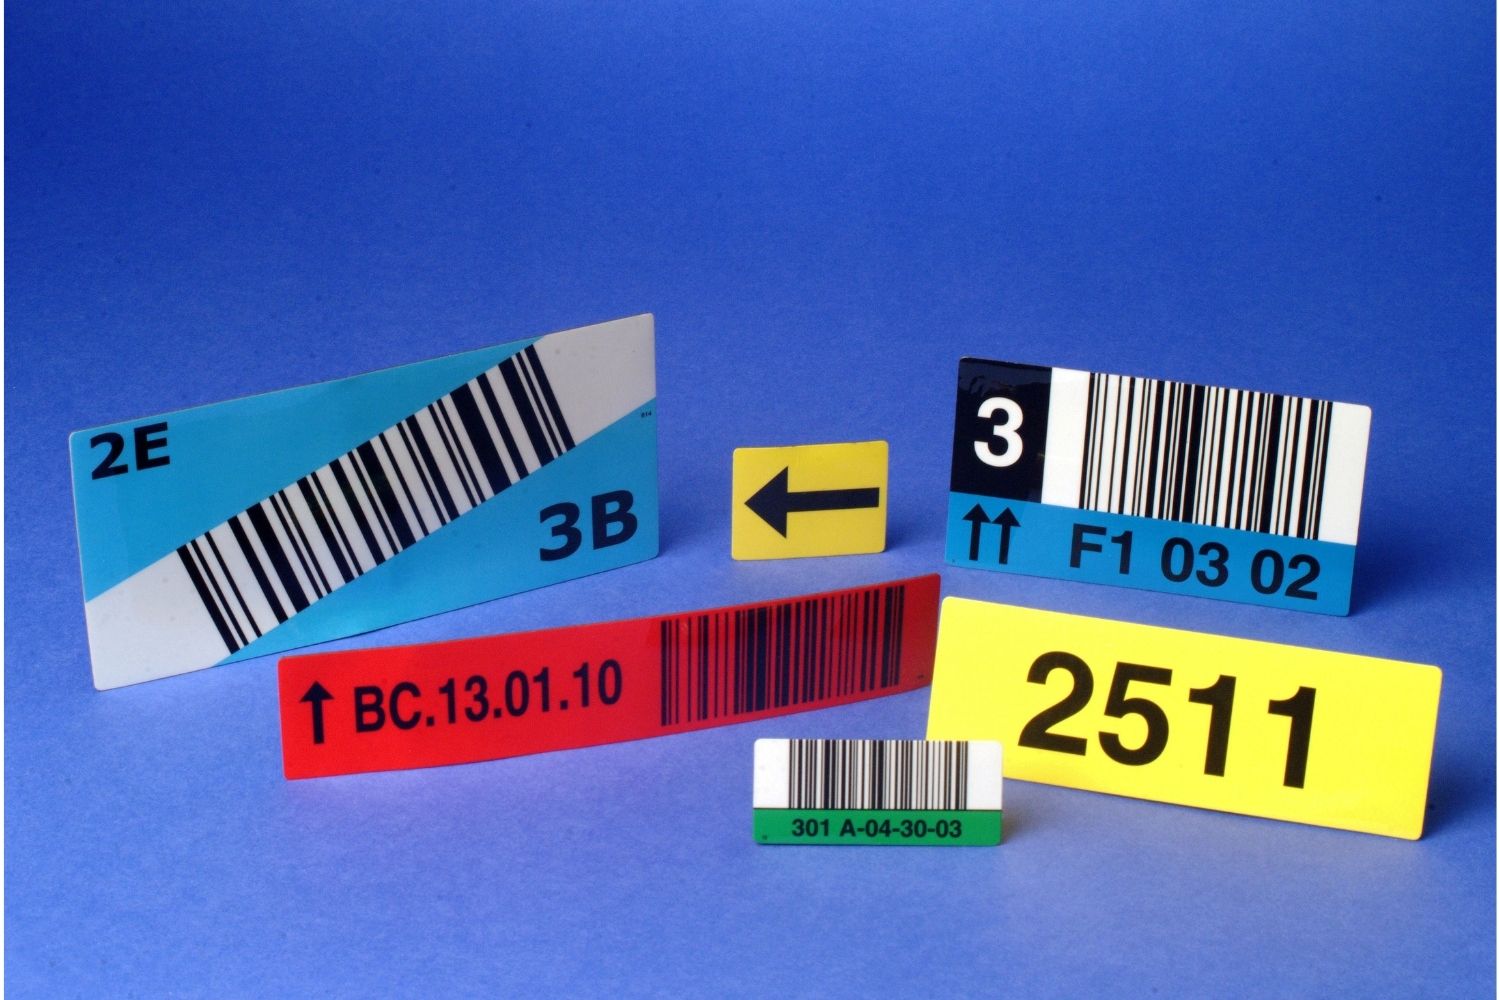 inotec Barcode RFID Solutions Diomagnetic